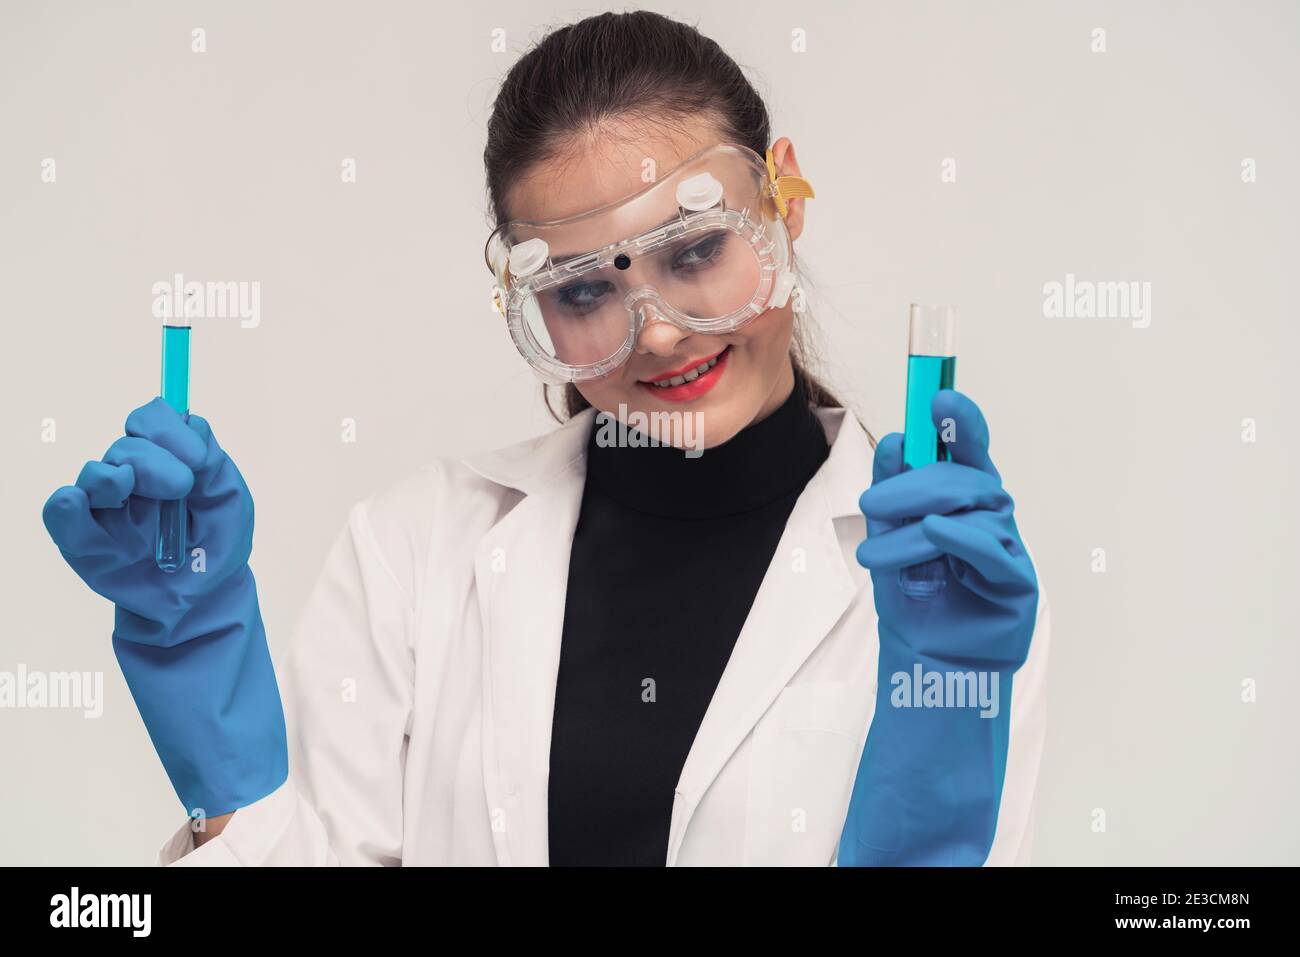 Young woman scientist working in chemical laboratory and examining biochemistry lab sample. Science technology medicine research and development study Stock Photo